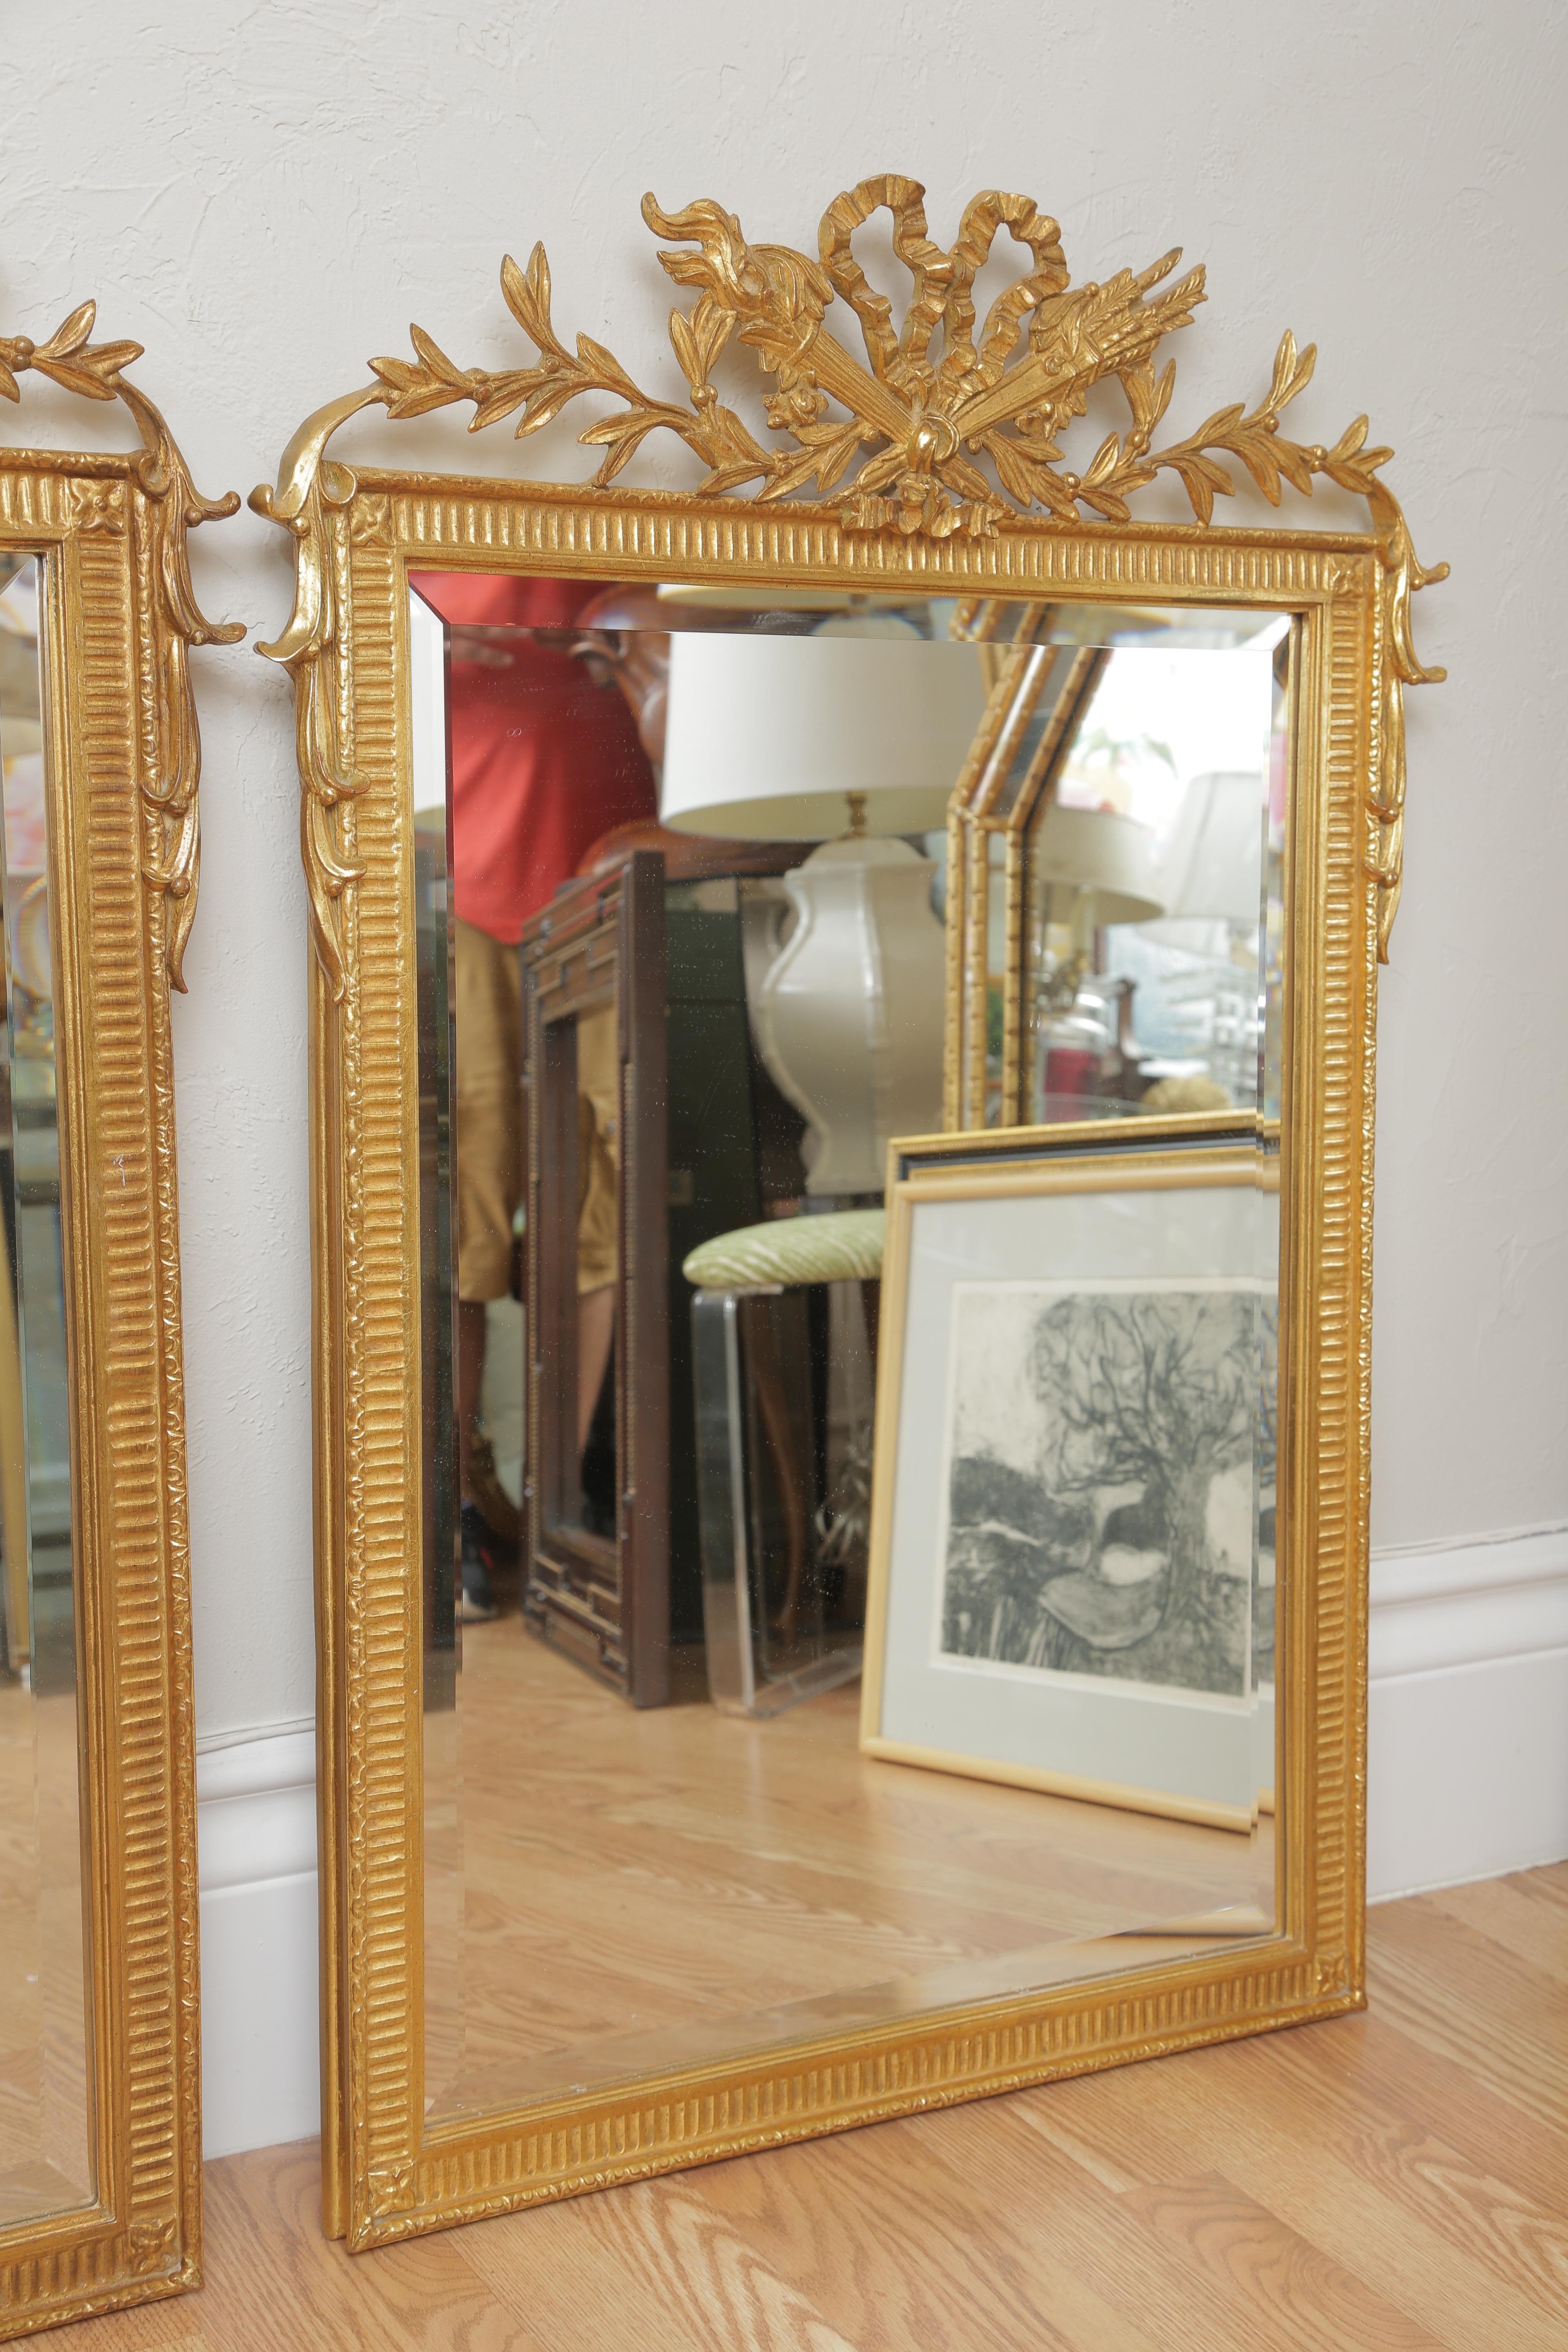 Pair of gilded French hunt mirrors by Carver's Guild.